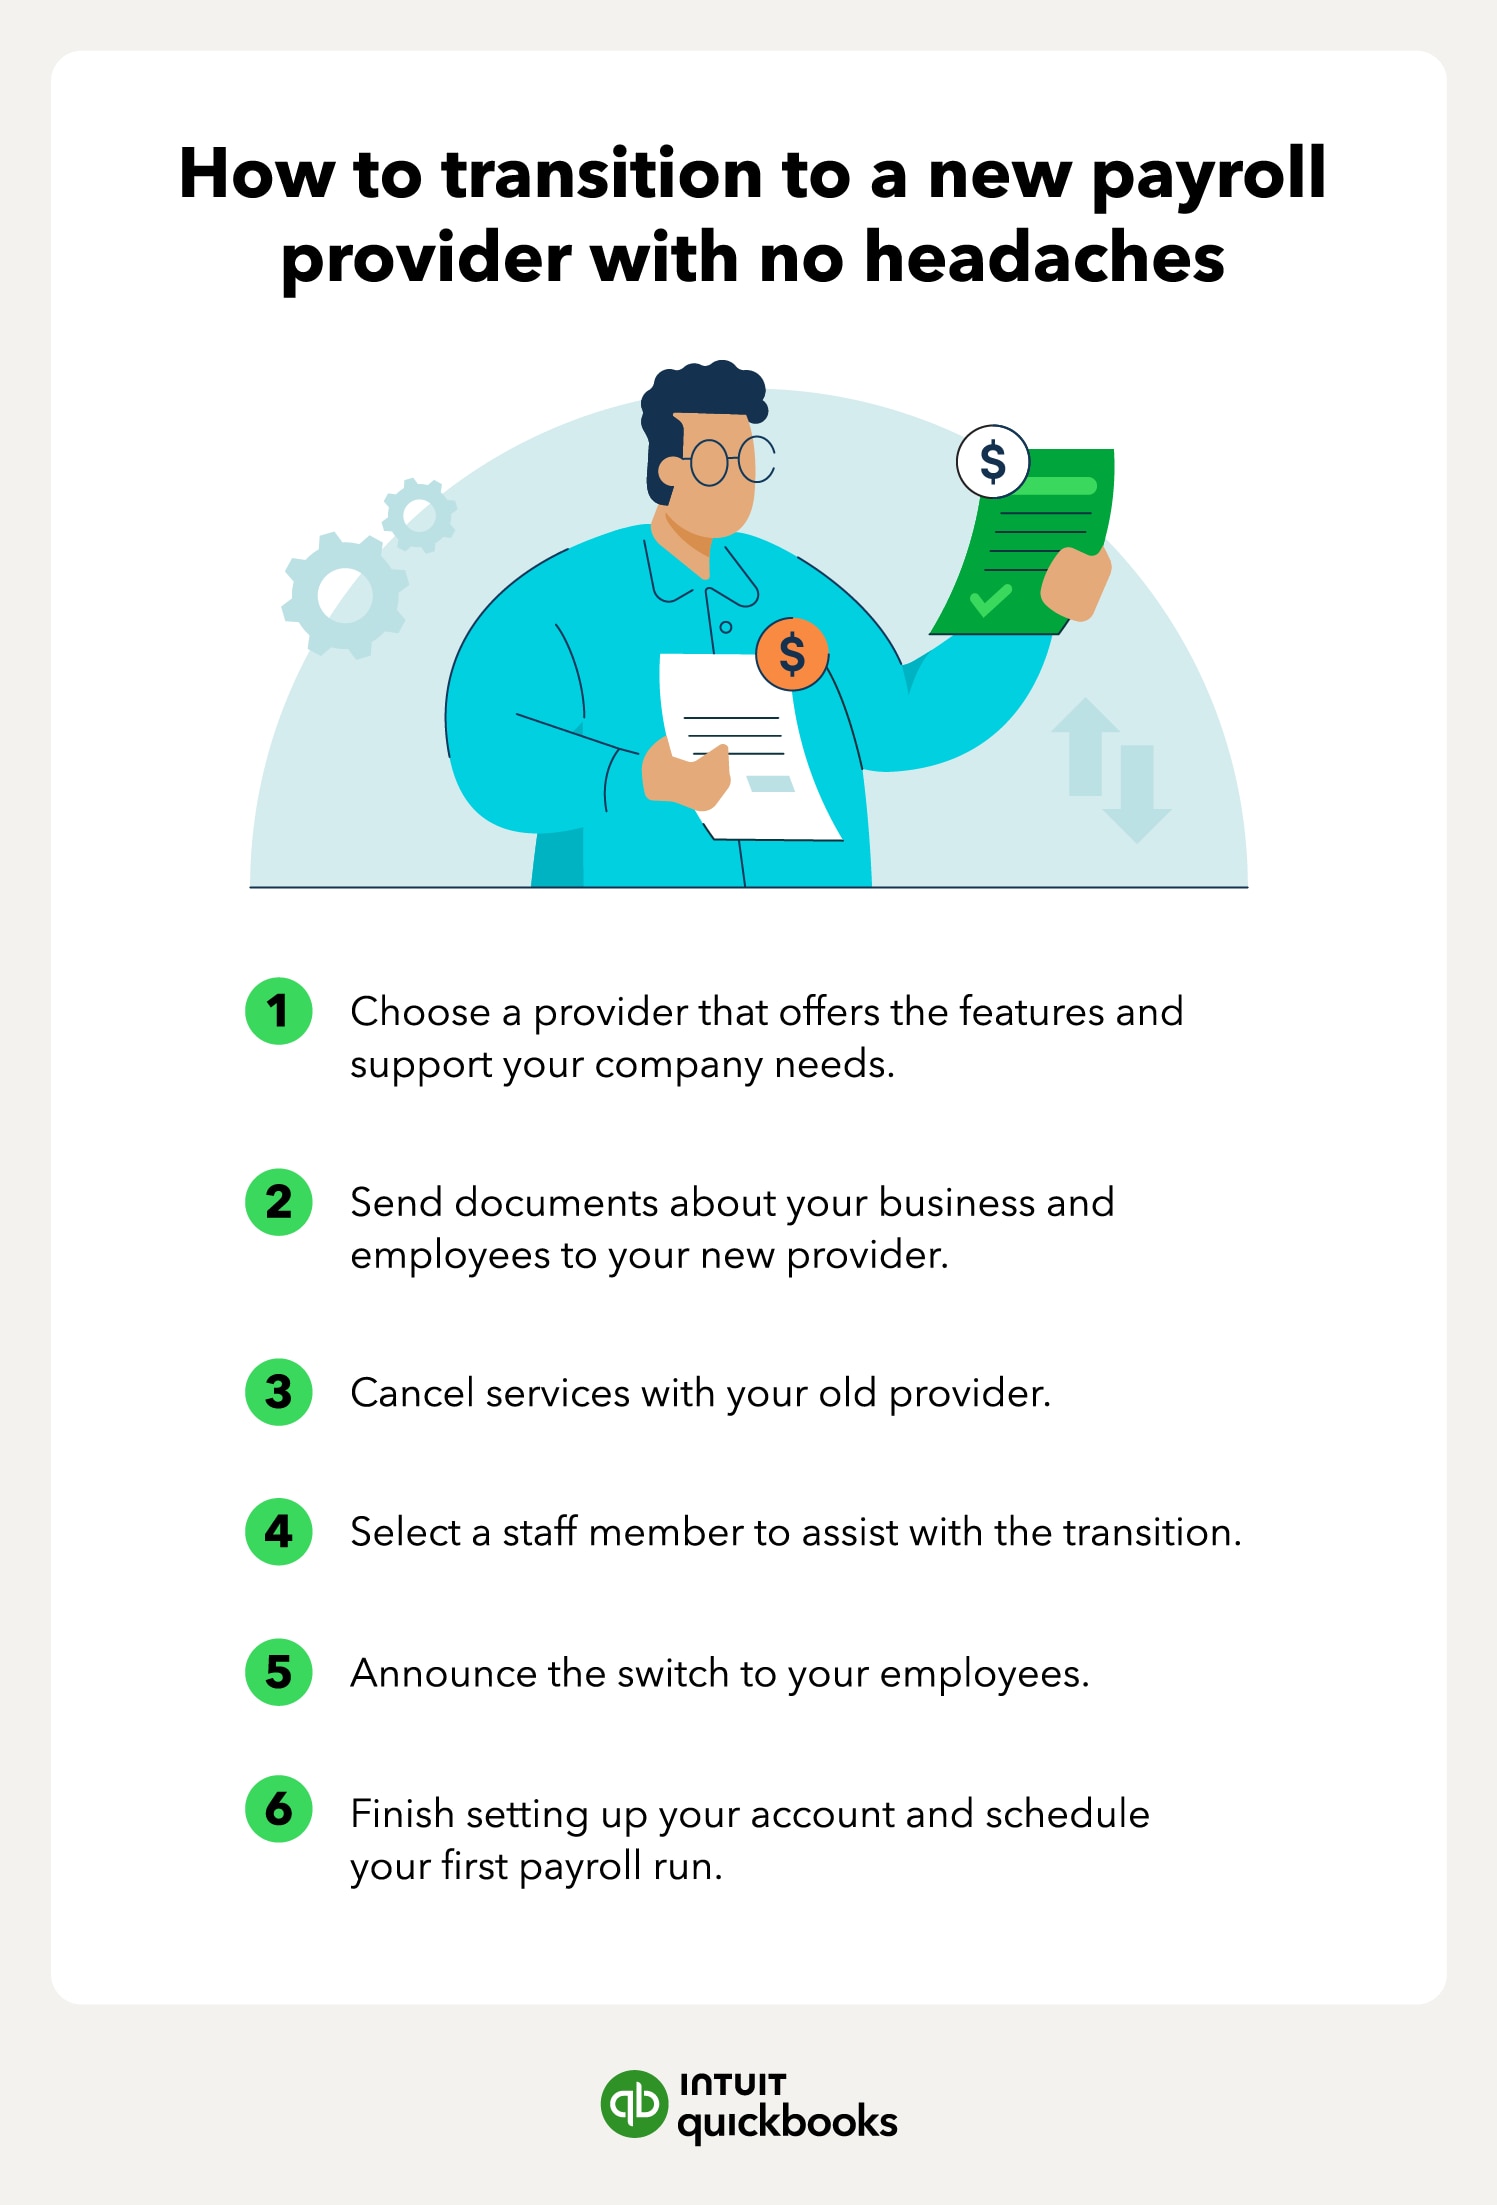 A list explaining the steps on how to switch to a new payroll provider.